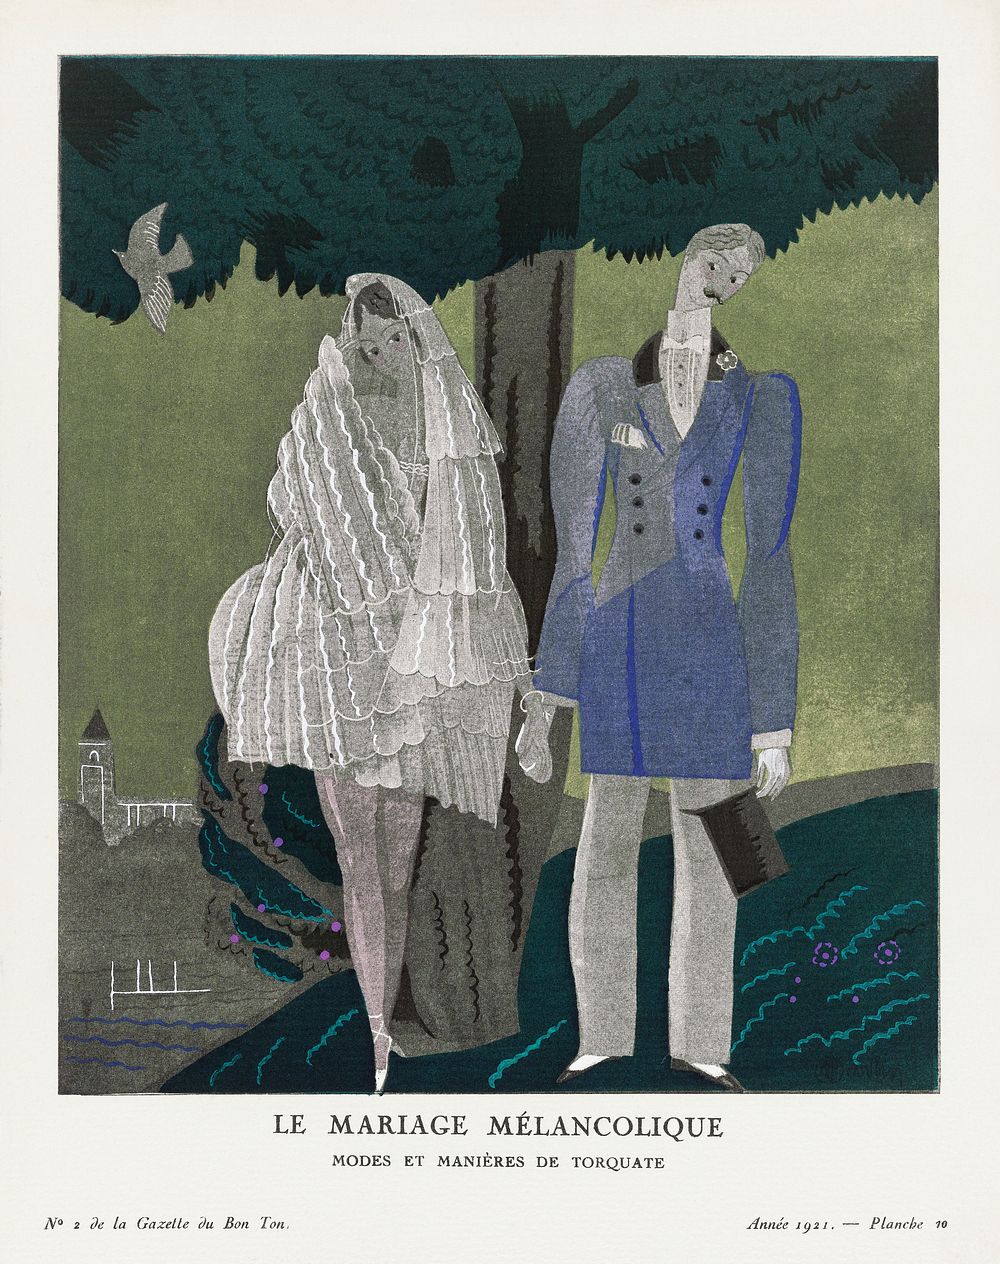 The melancholy marriage, Modes et Mani&egrave;res de Torquate (1921) fashion plate in high resolution by Charles Martin…